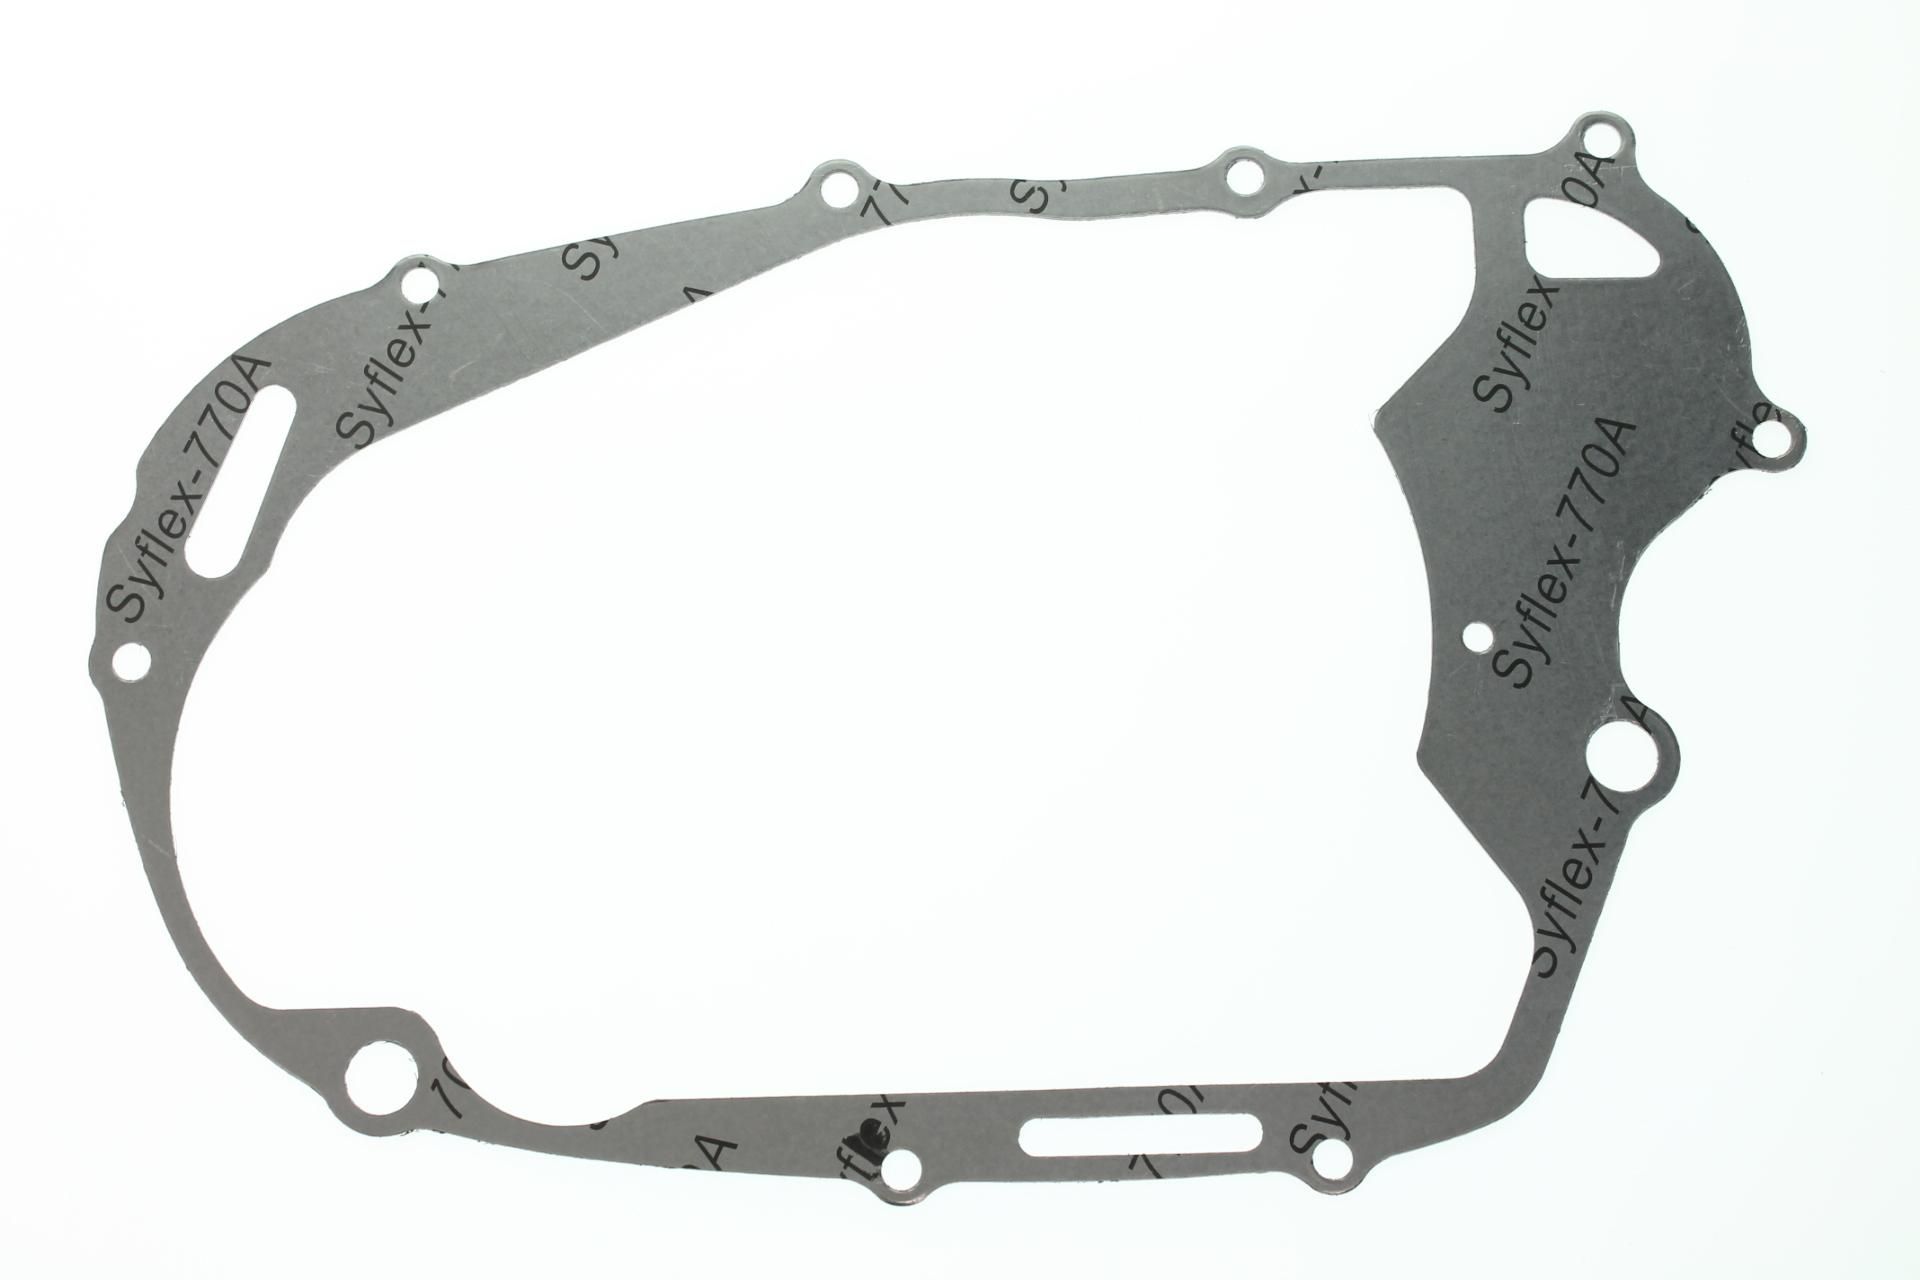 3DM-15461-00-00 Superseded by 4RF-15461-01-00 - GASKET, CRANKCASE CO